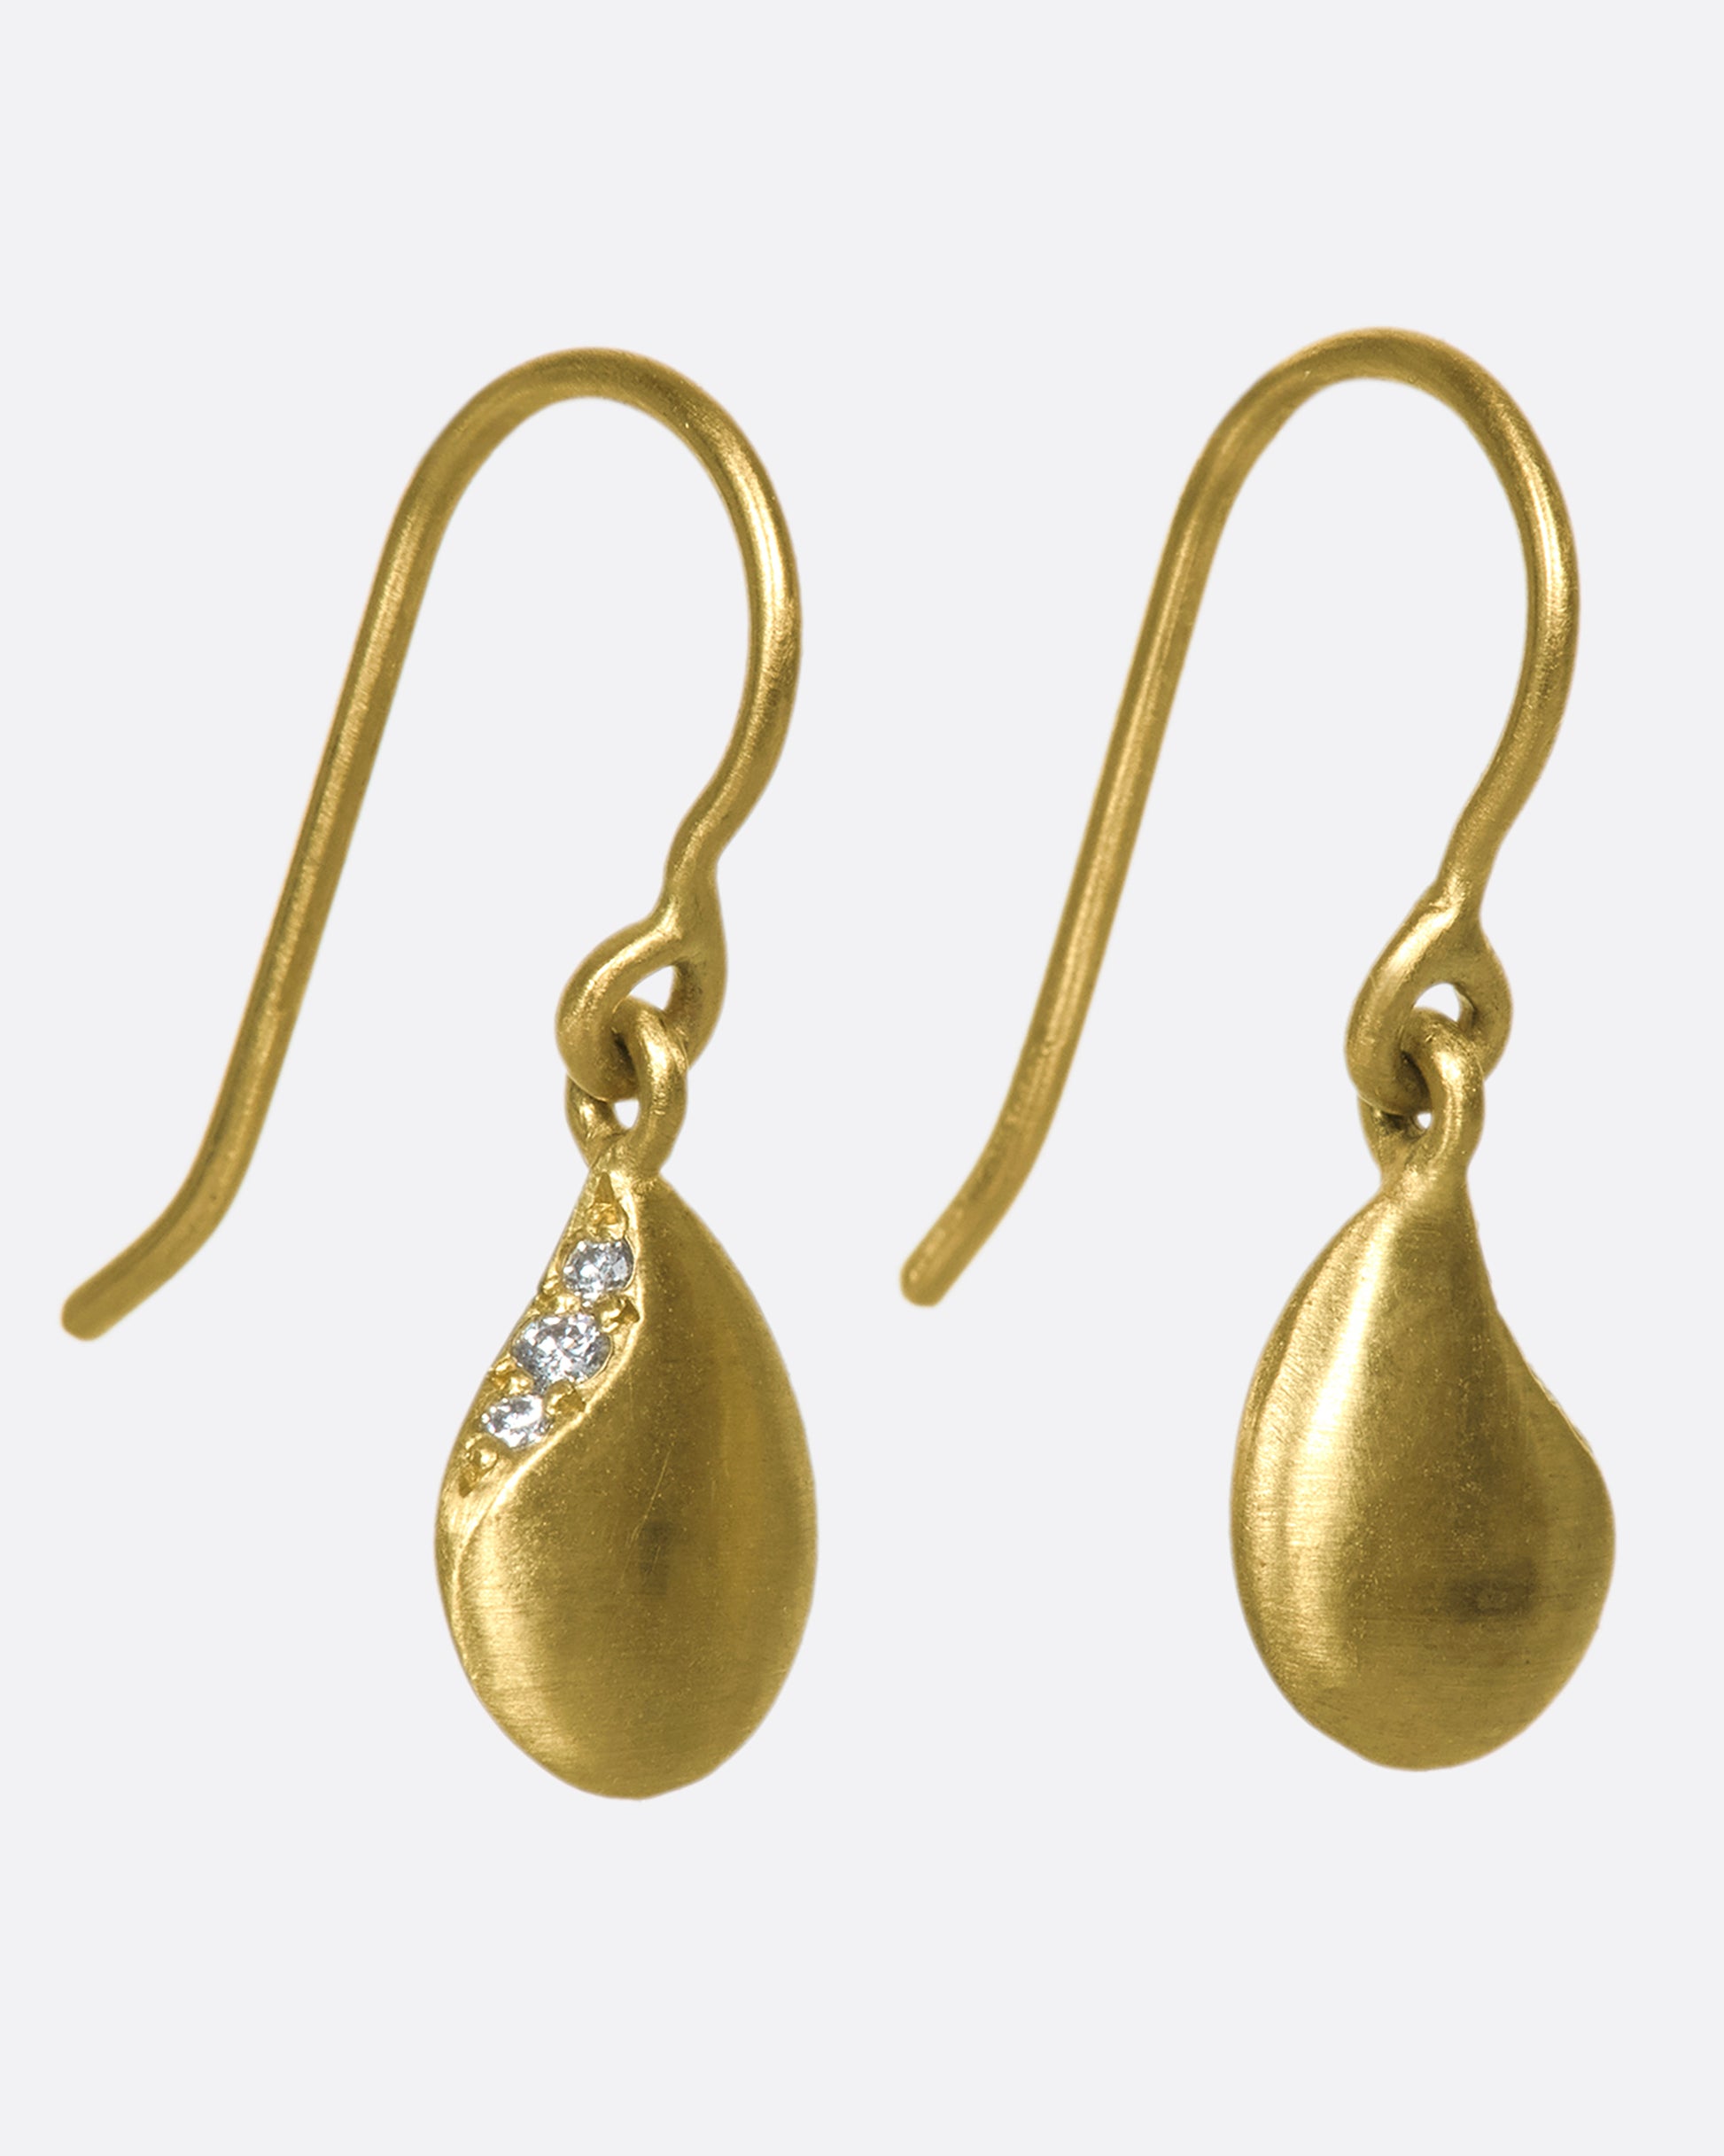 A beautiful pair of 10k gold droplet dangle earrings, etched away to reveal three glittery diamonds.